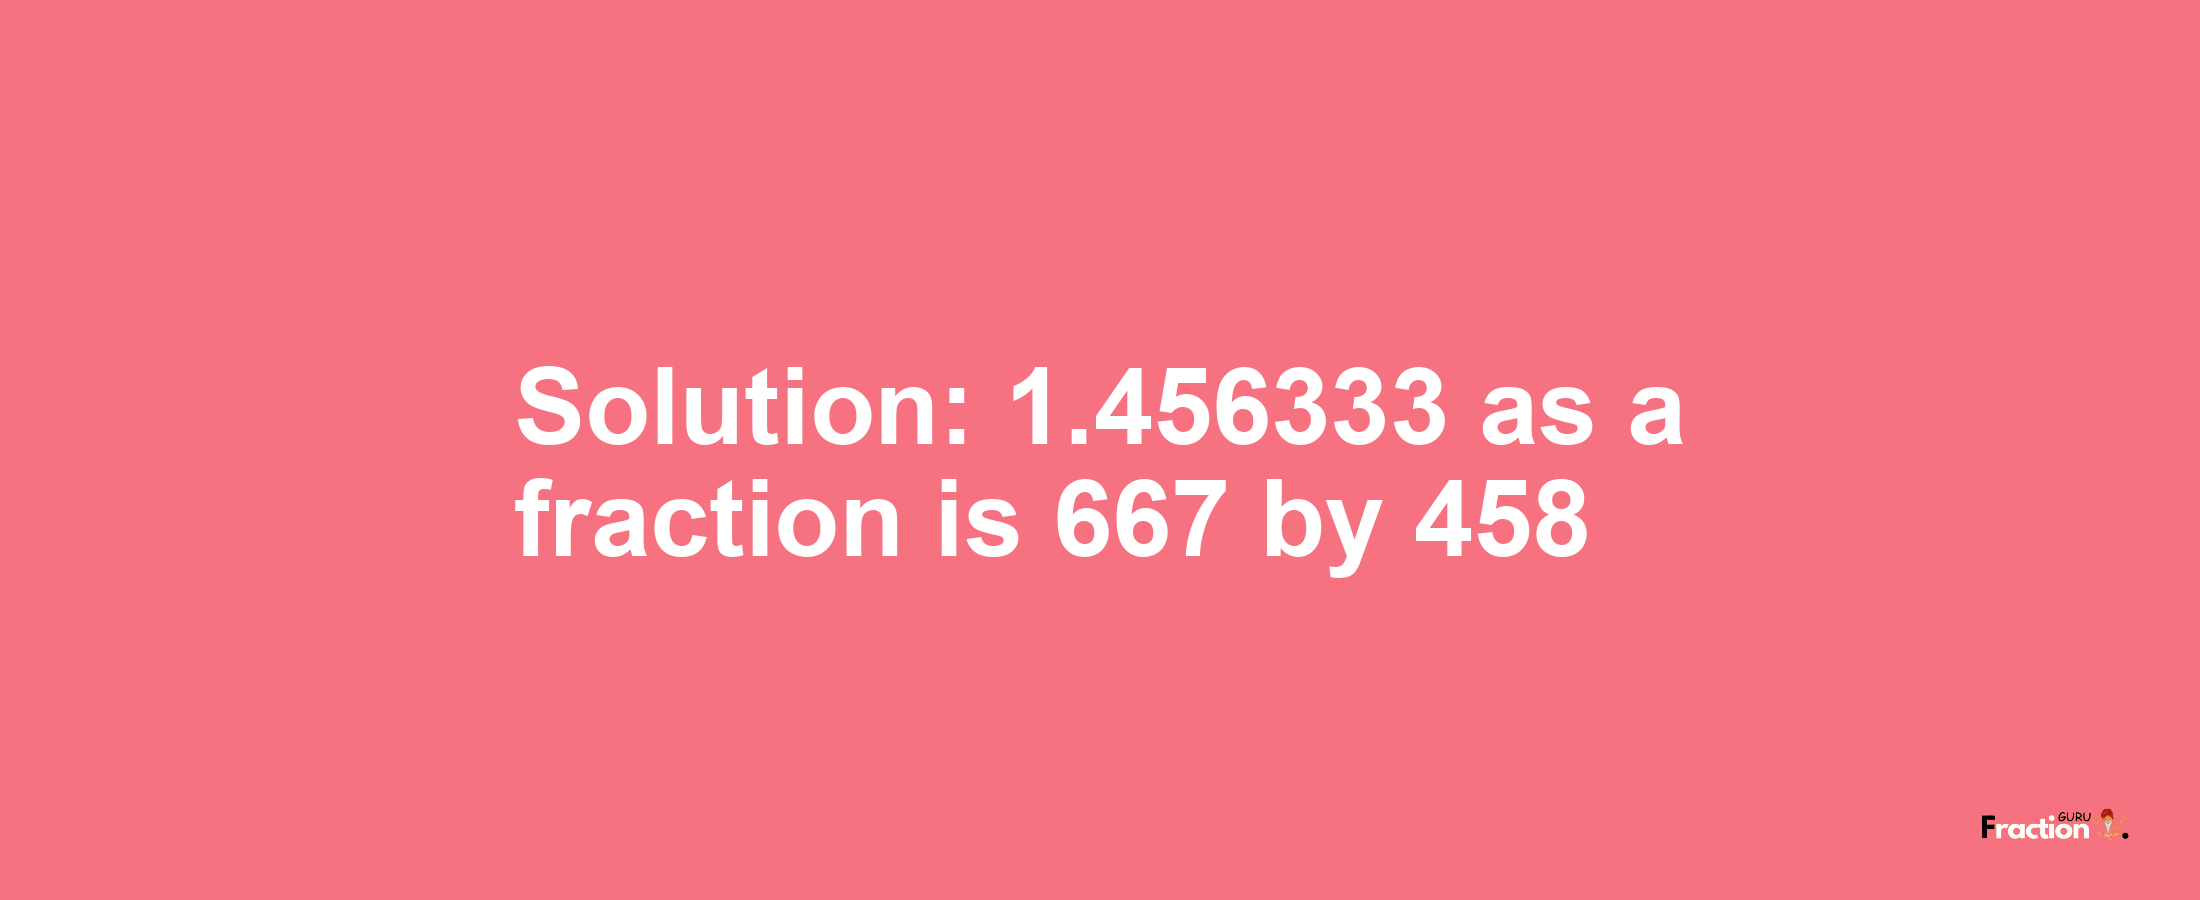 Solution:1.456333 as a fraction is 667/458